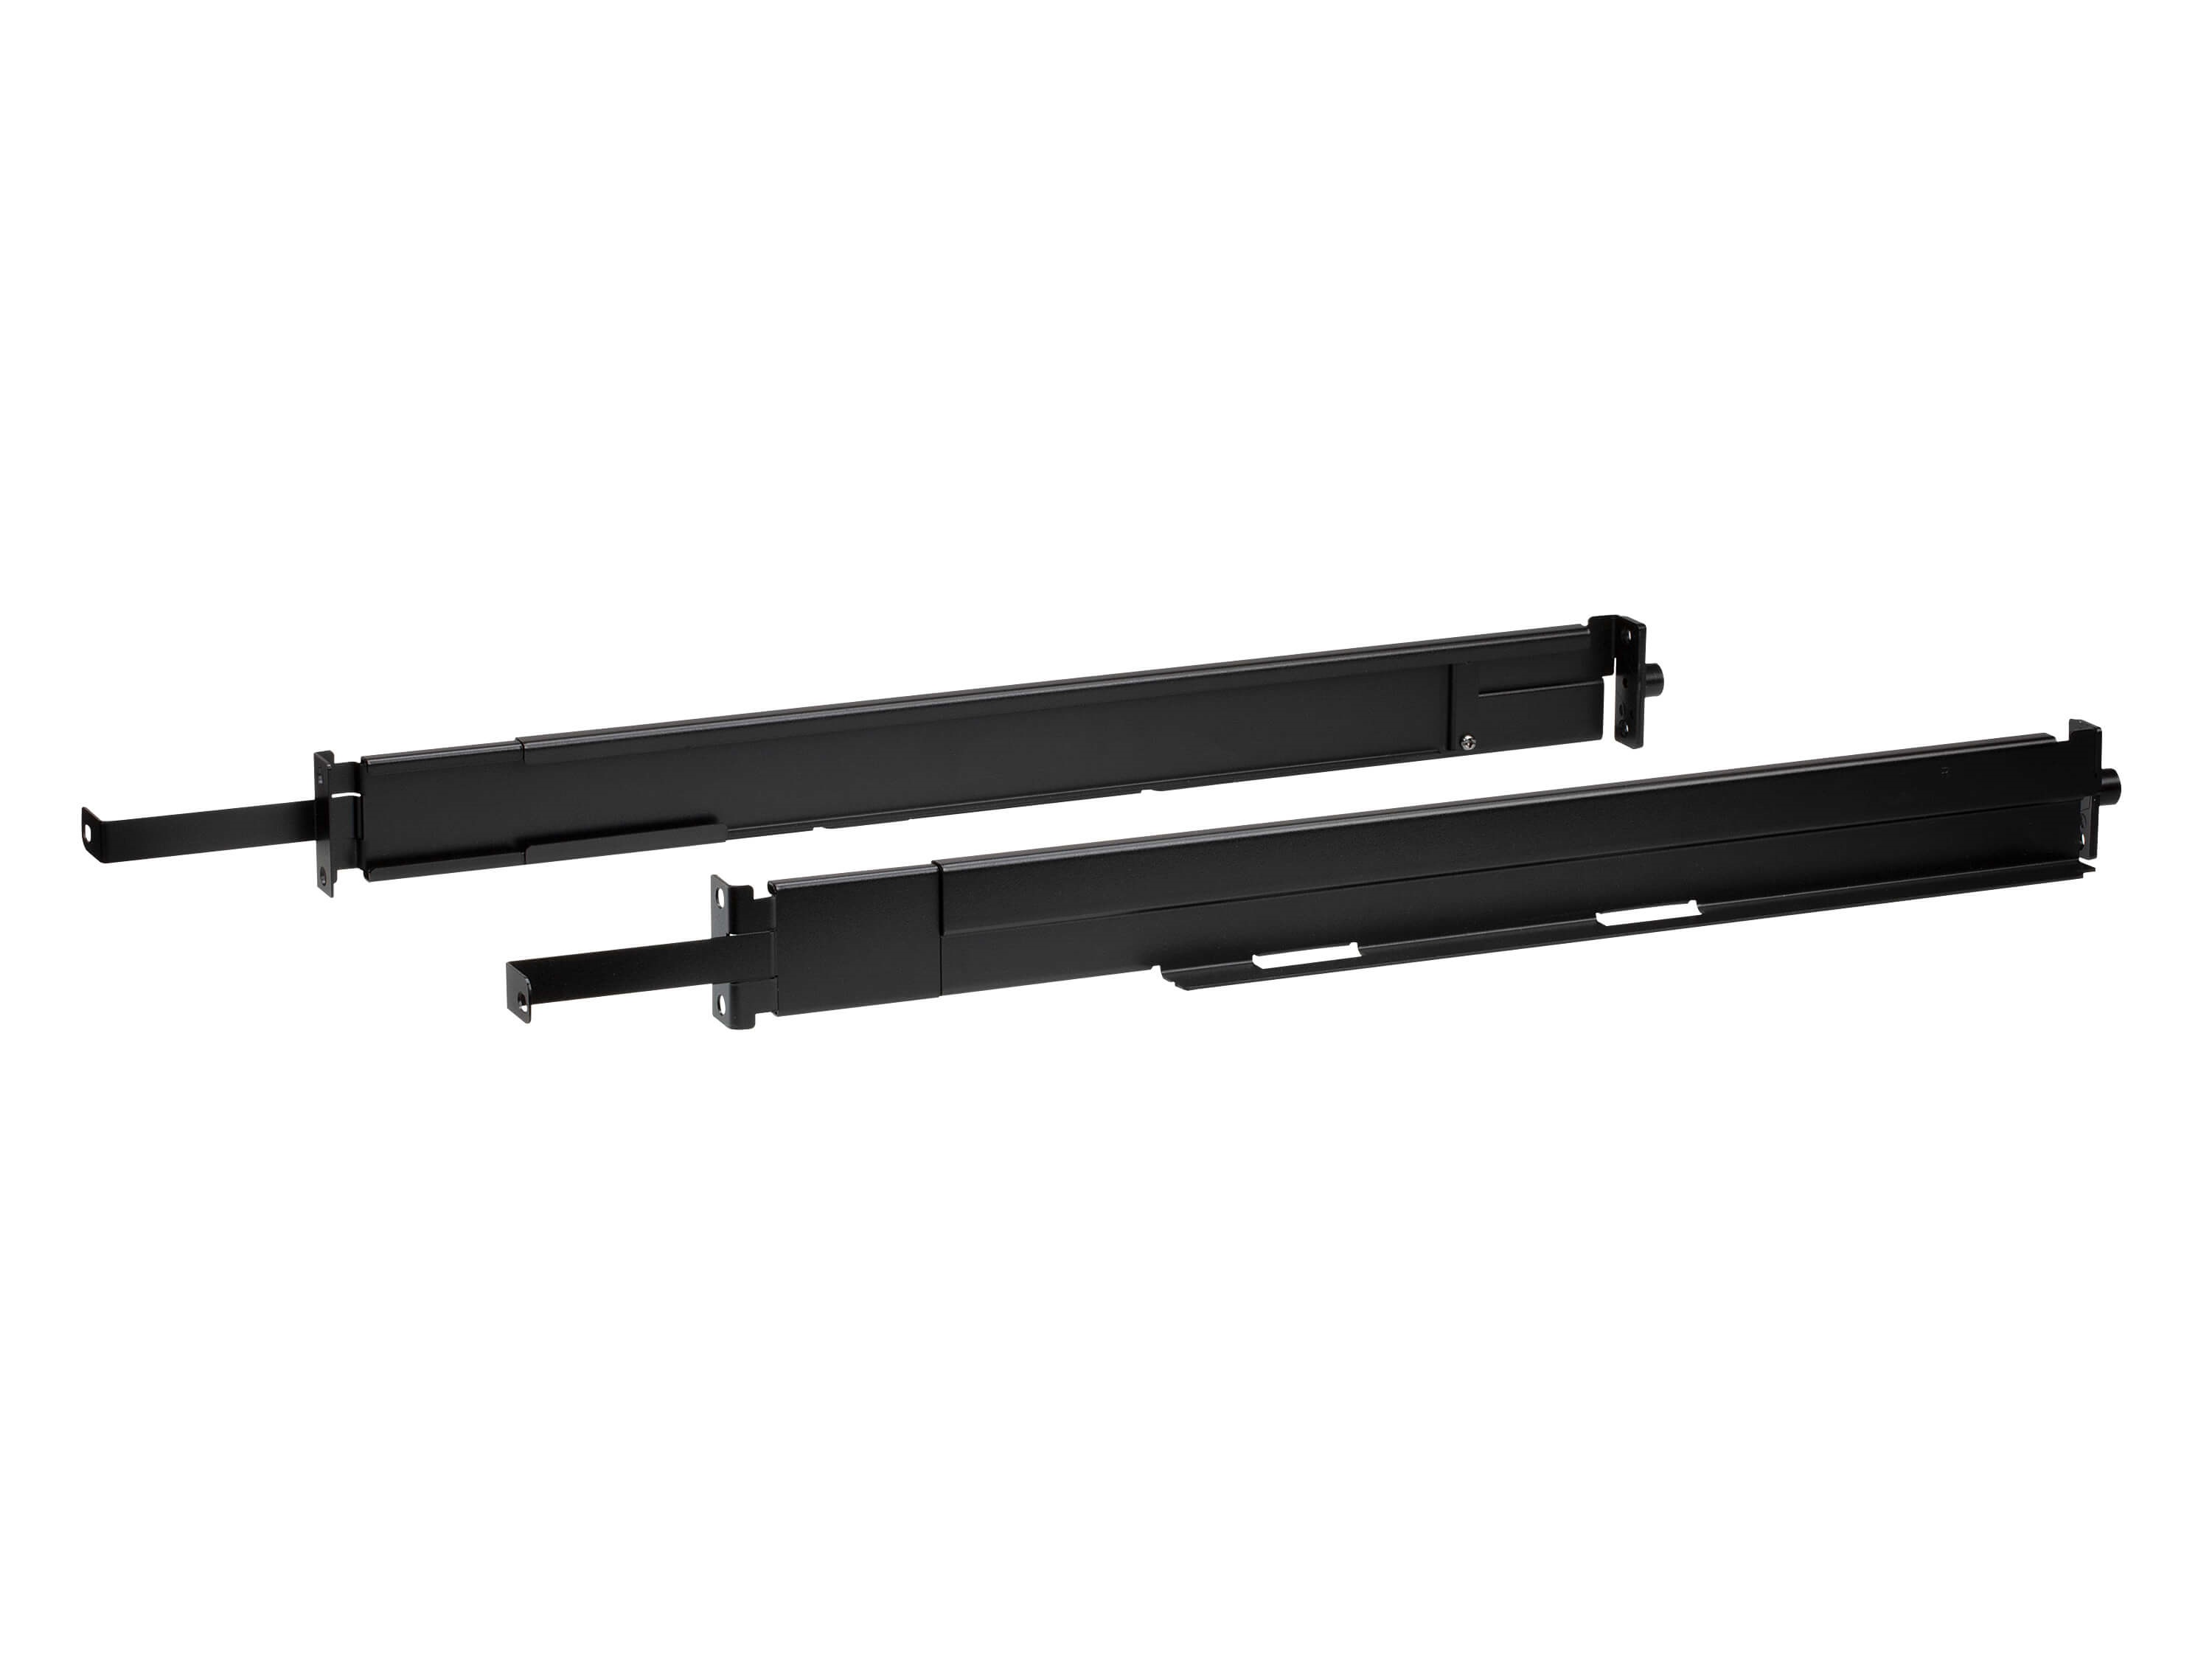 2K-0005 Easy Installation Rack Mount Kit (Short) for LCD KVM Switch/Console by Aten